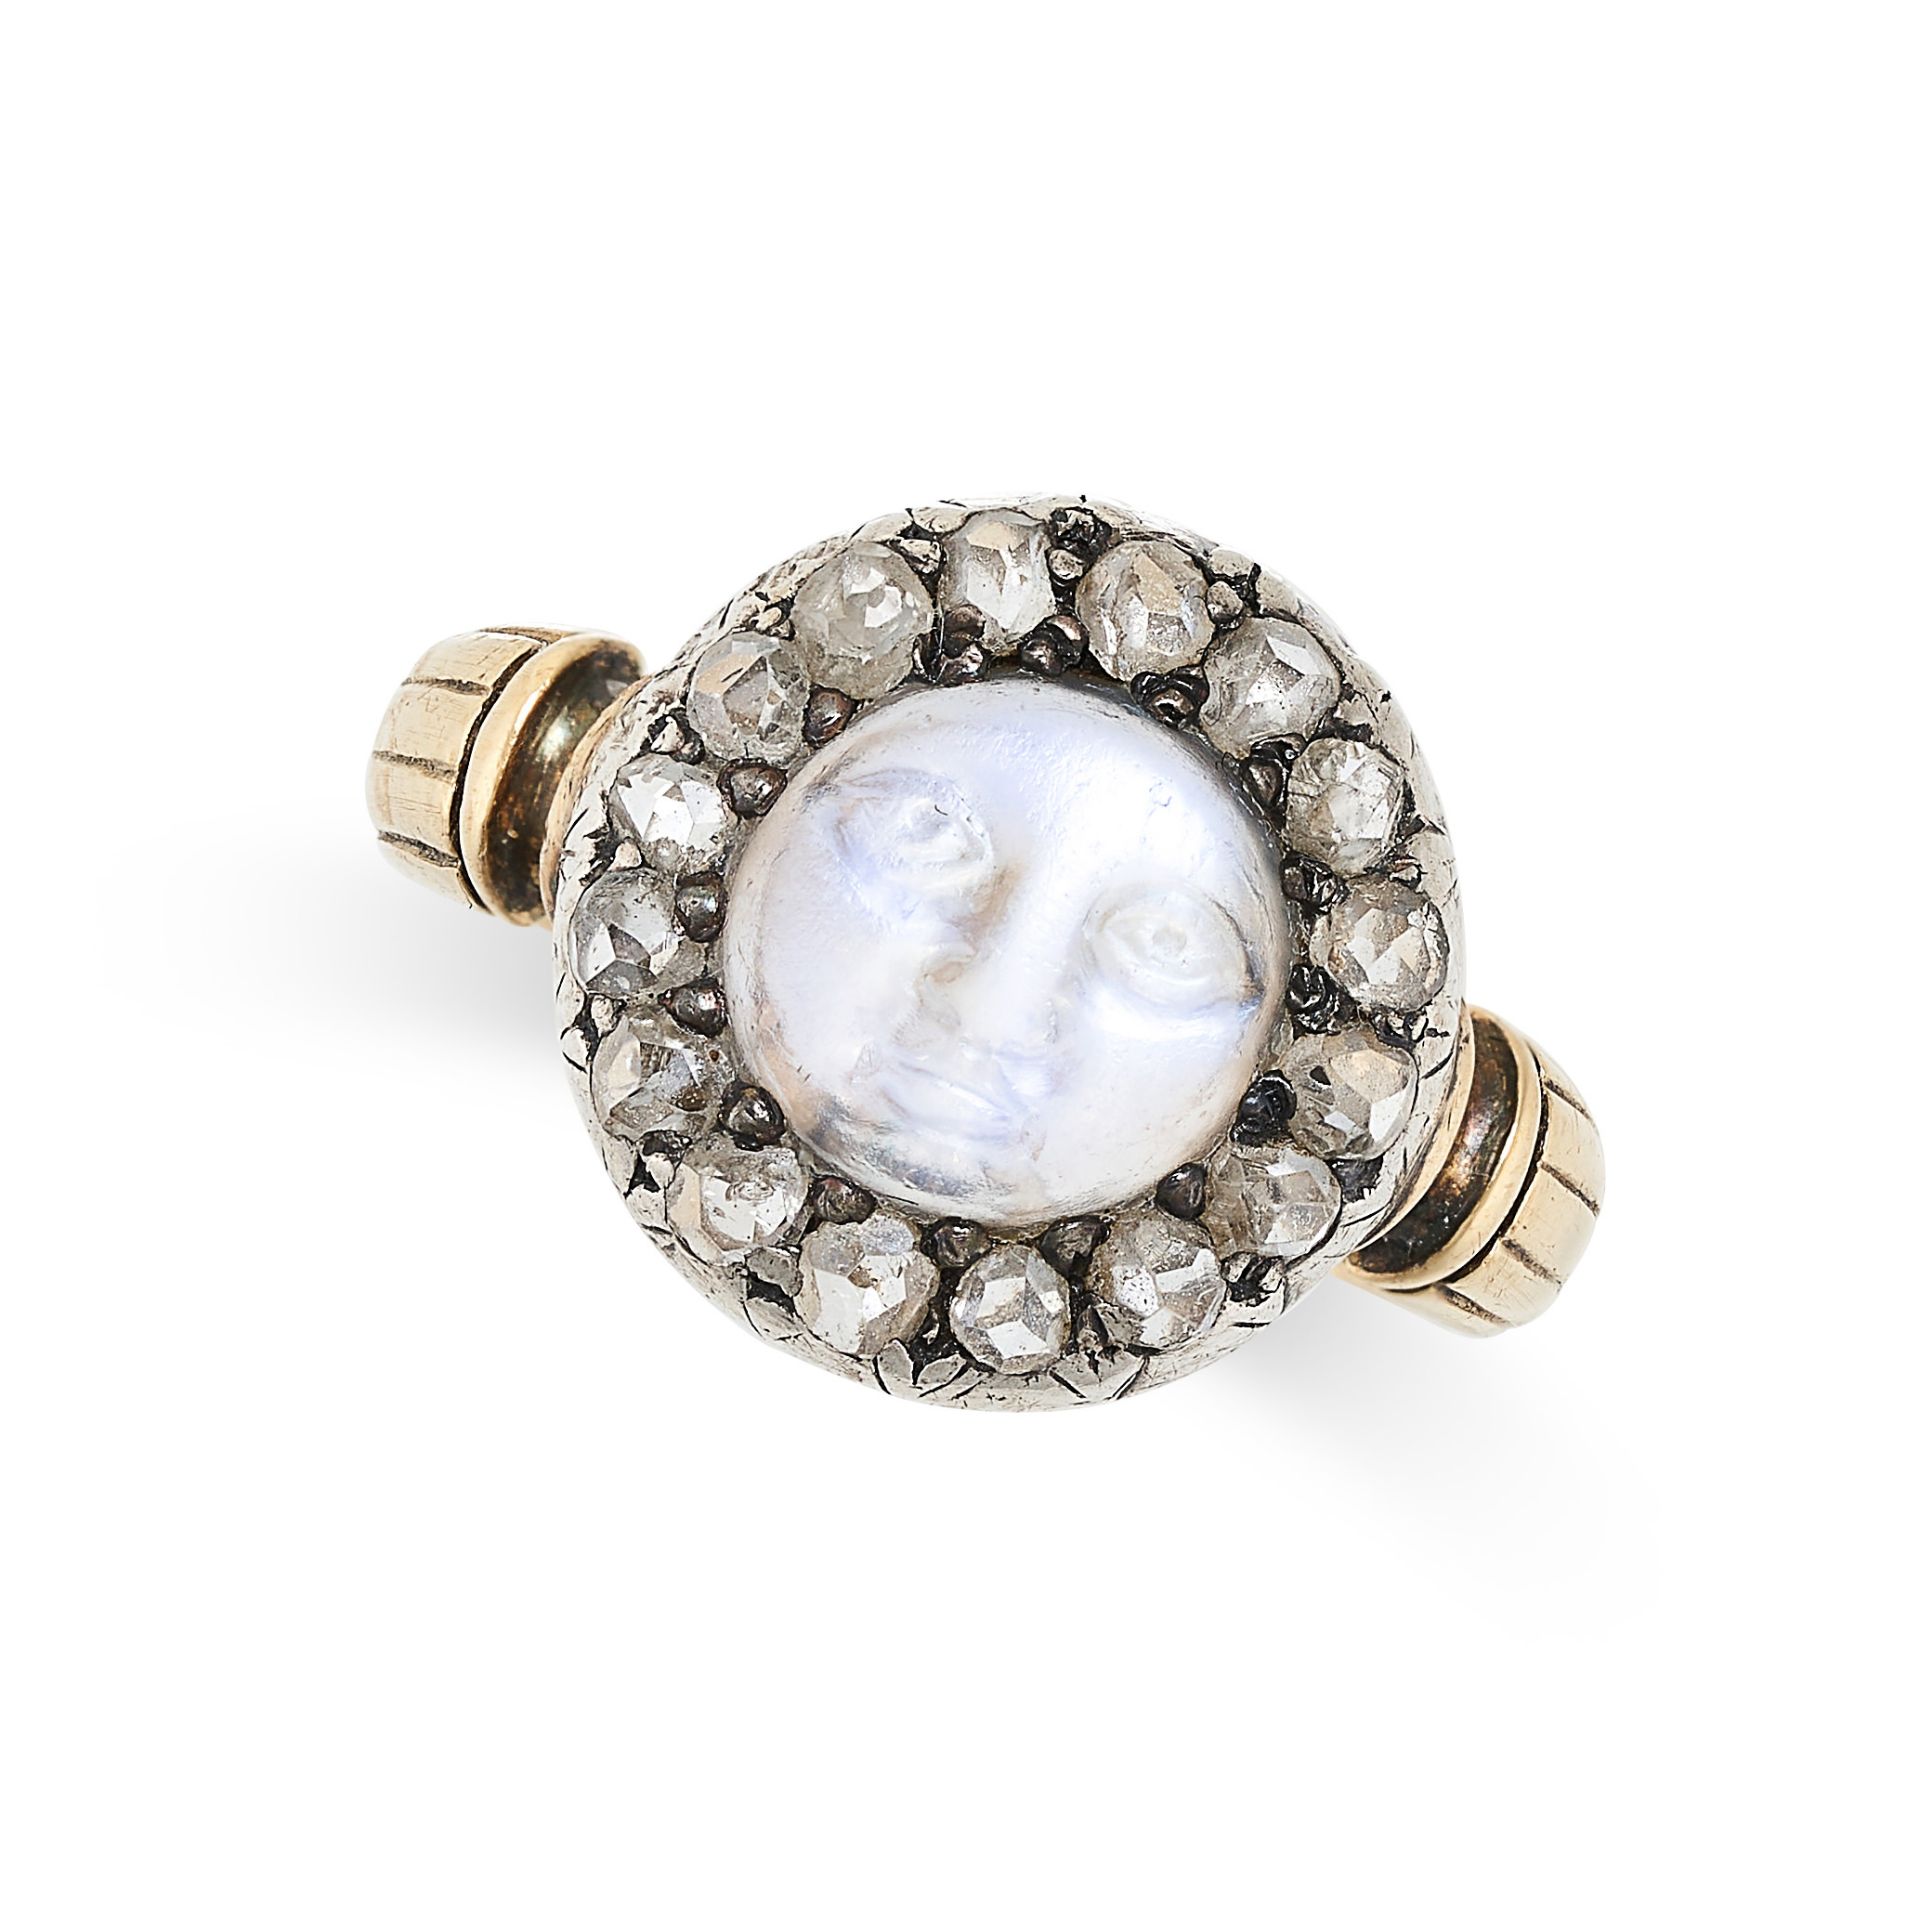 AN ANTIQUE MOONSTONE MAN IN THE MOON AND DIAMOND RING in yellow gold and silver, set with a carved